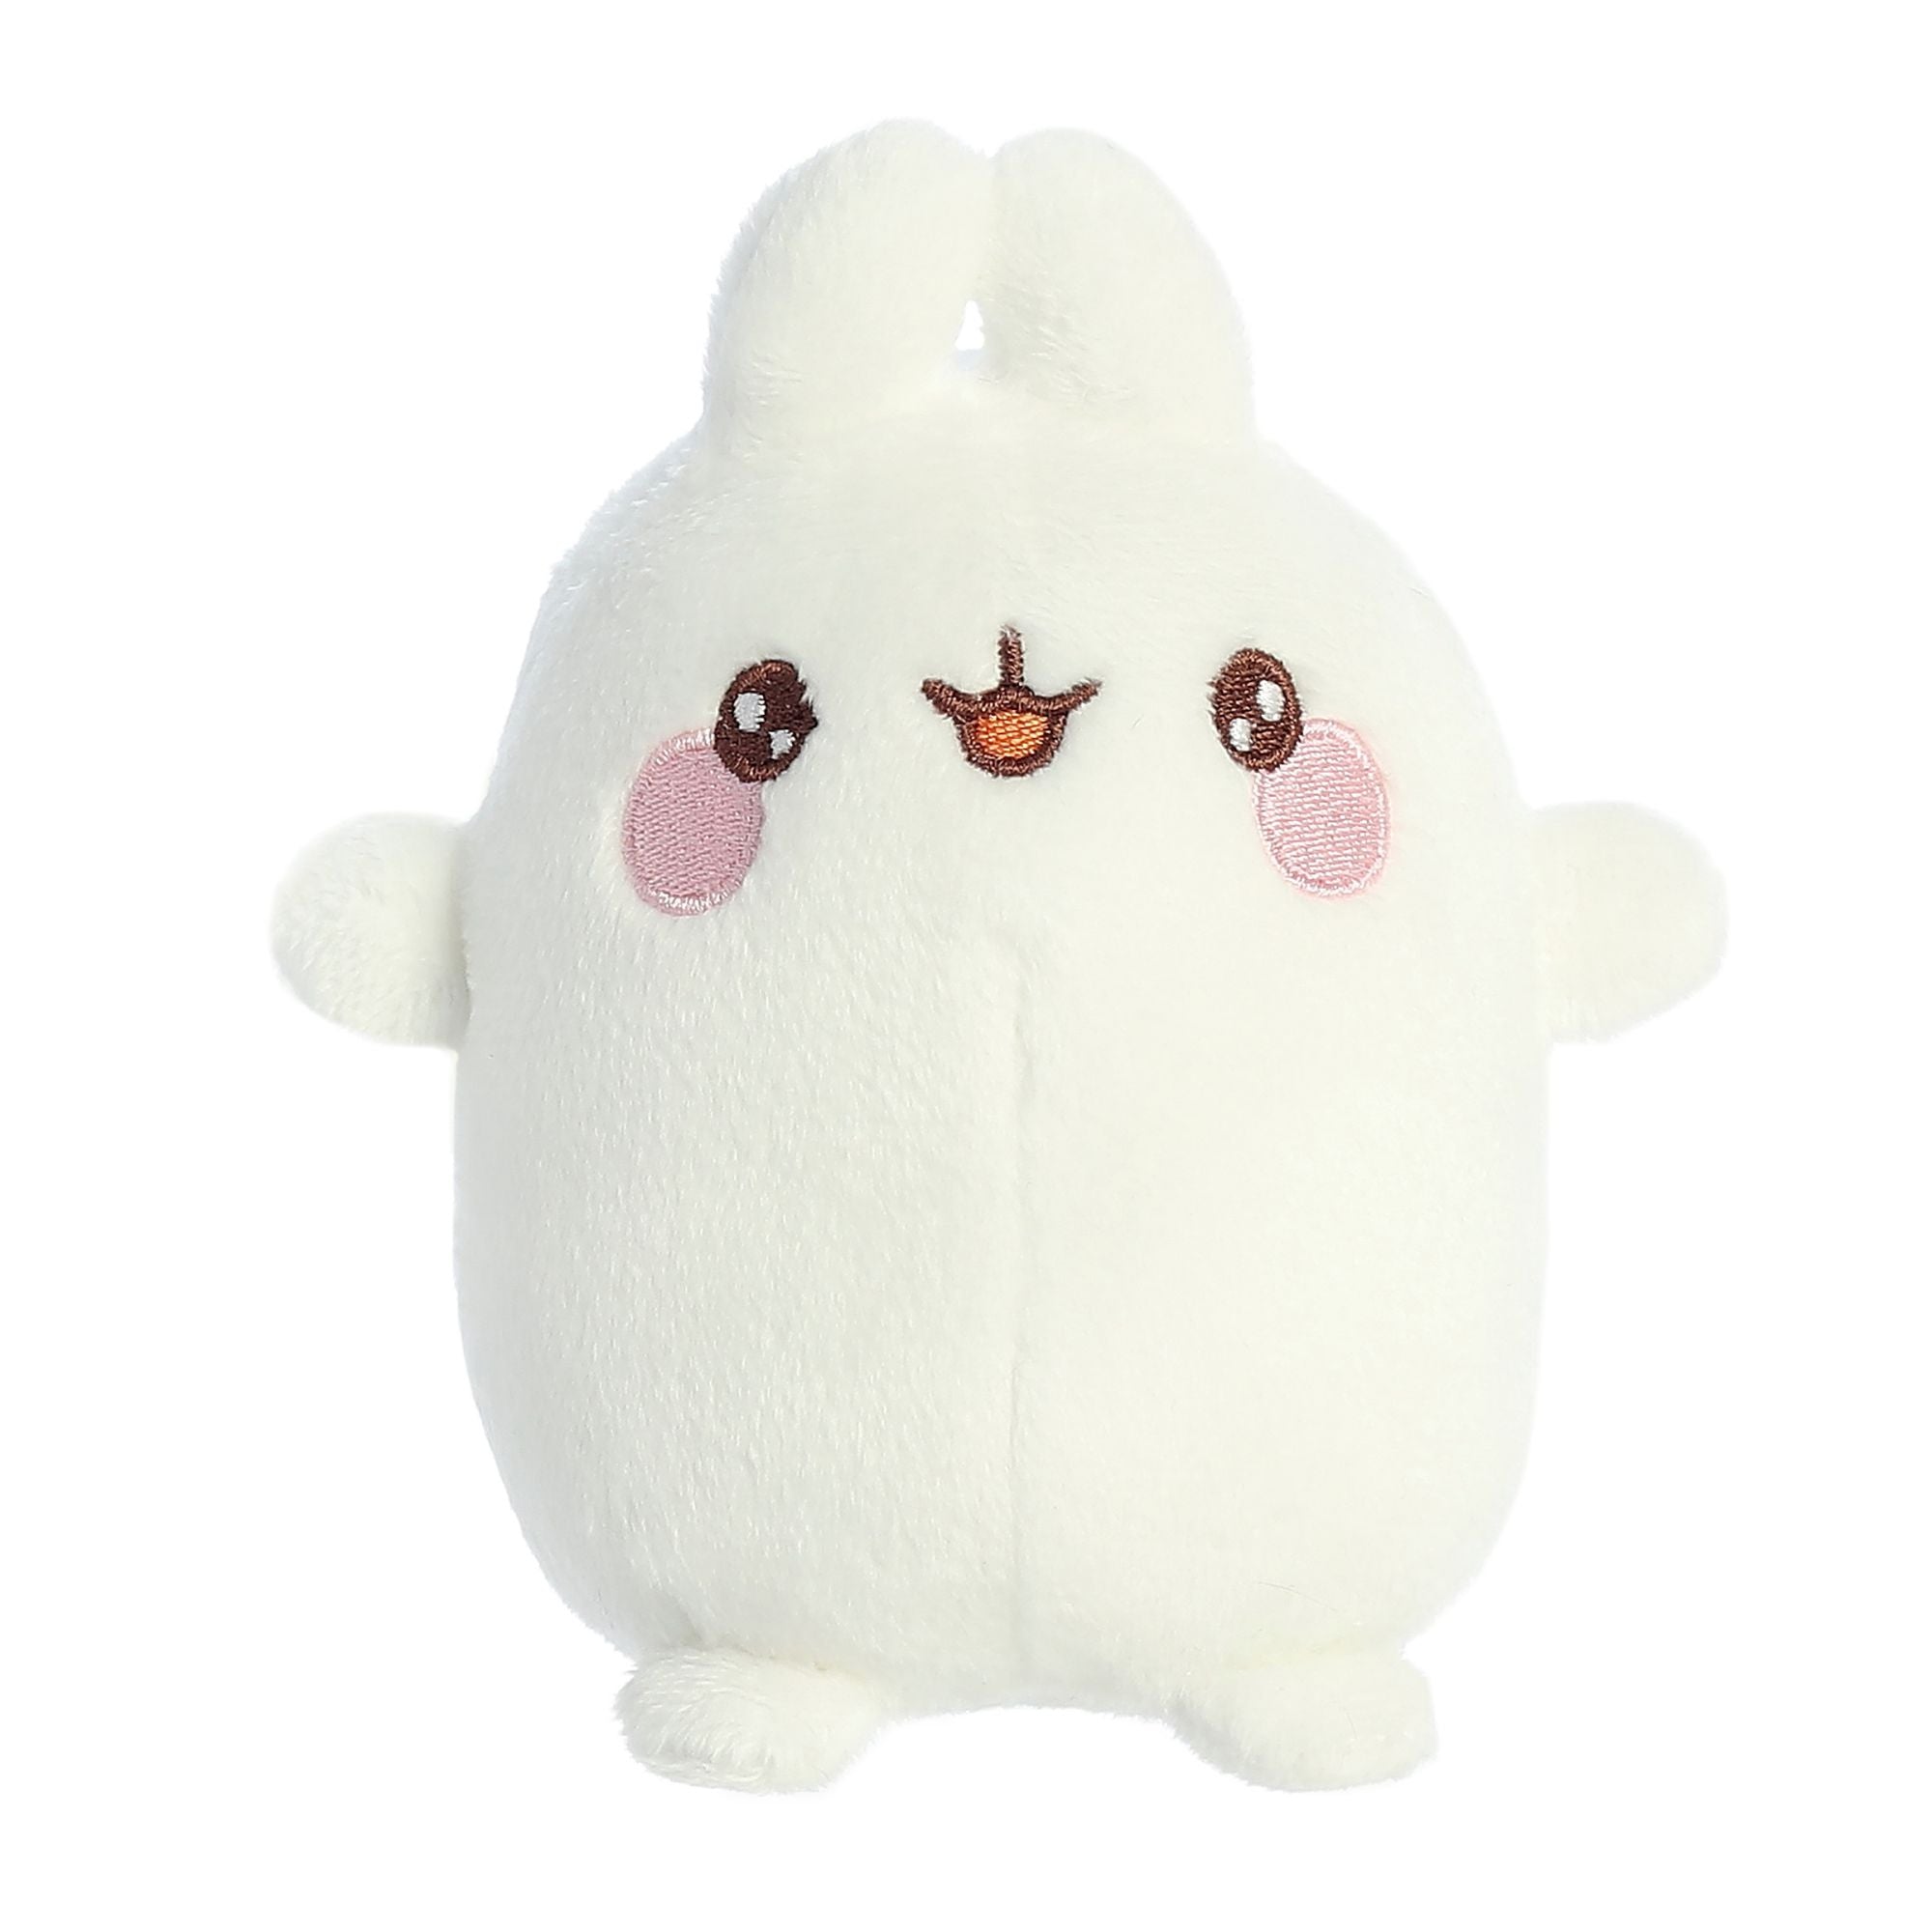 Molang Keychain Plush  Molang Official Website